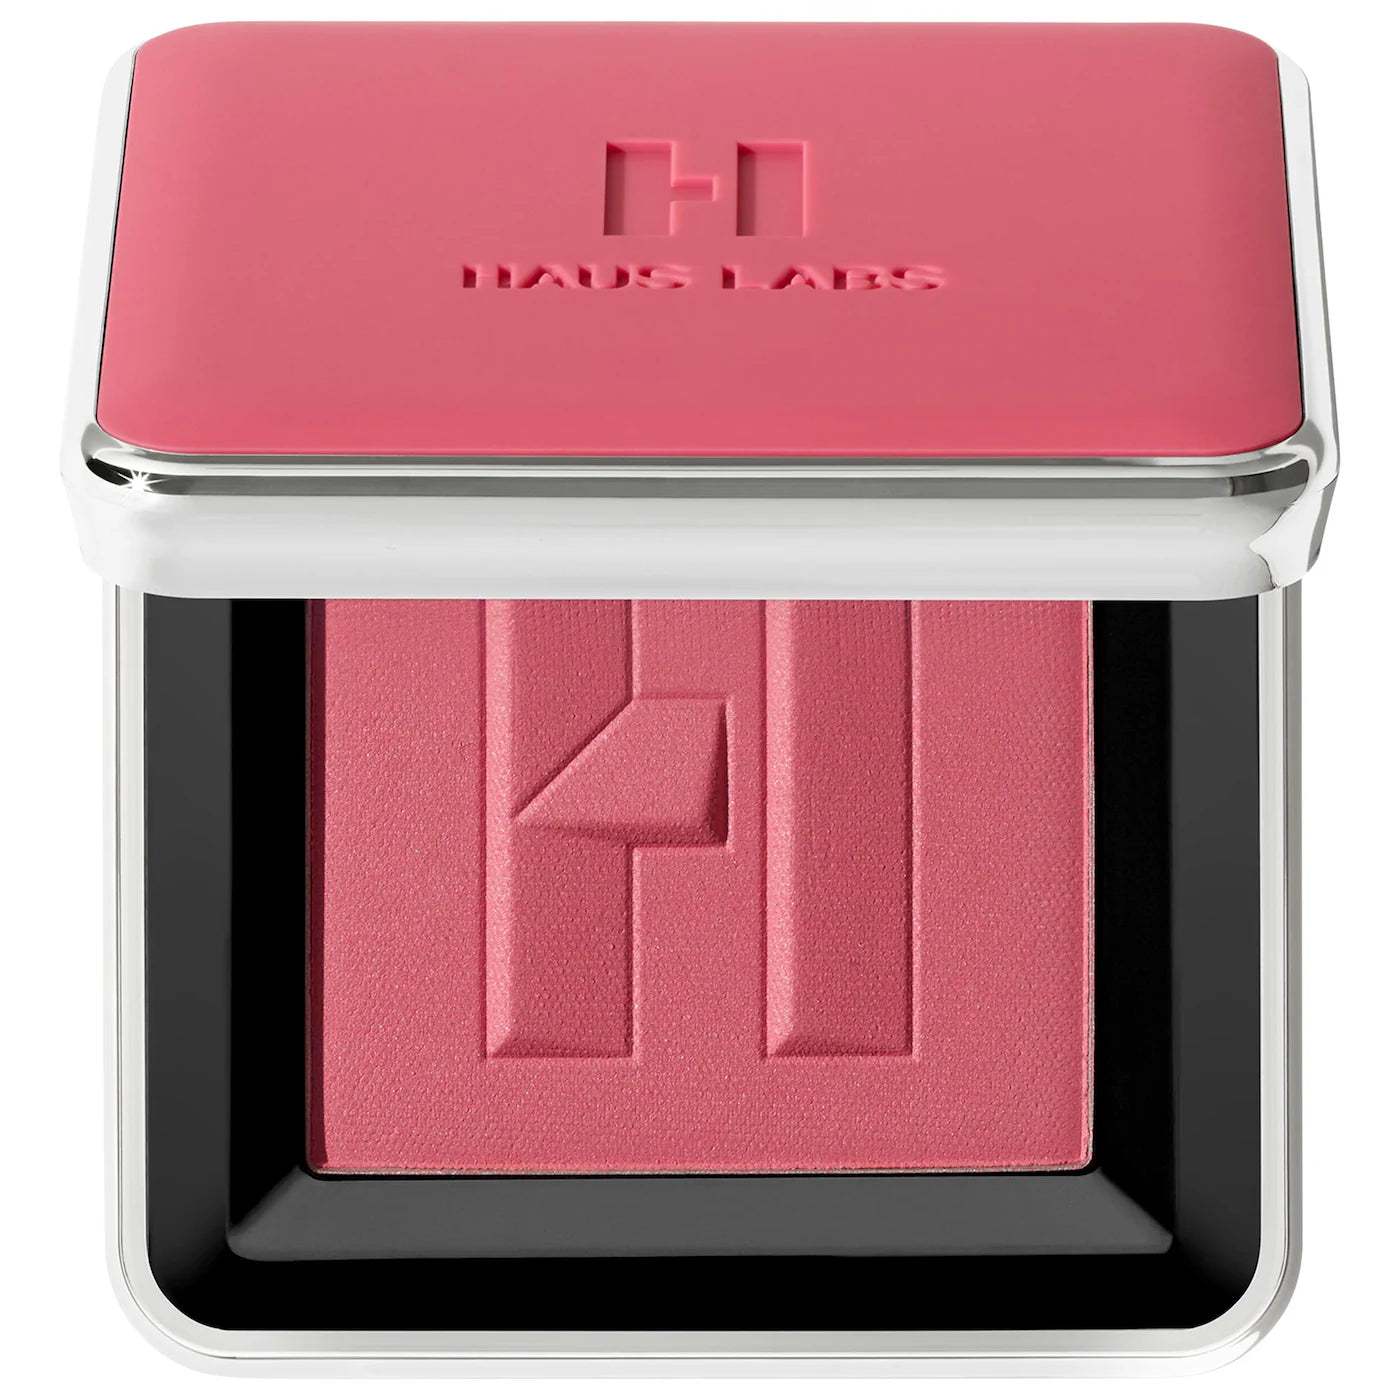 HAUS LABS BY LADY GAGA | Color Fuse Talc-Free Blush Powder With Fermented Arnica | Hibiscus Haze